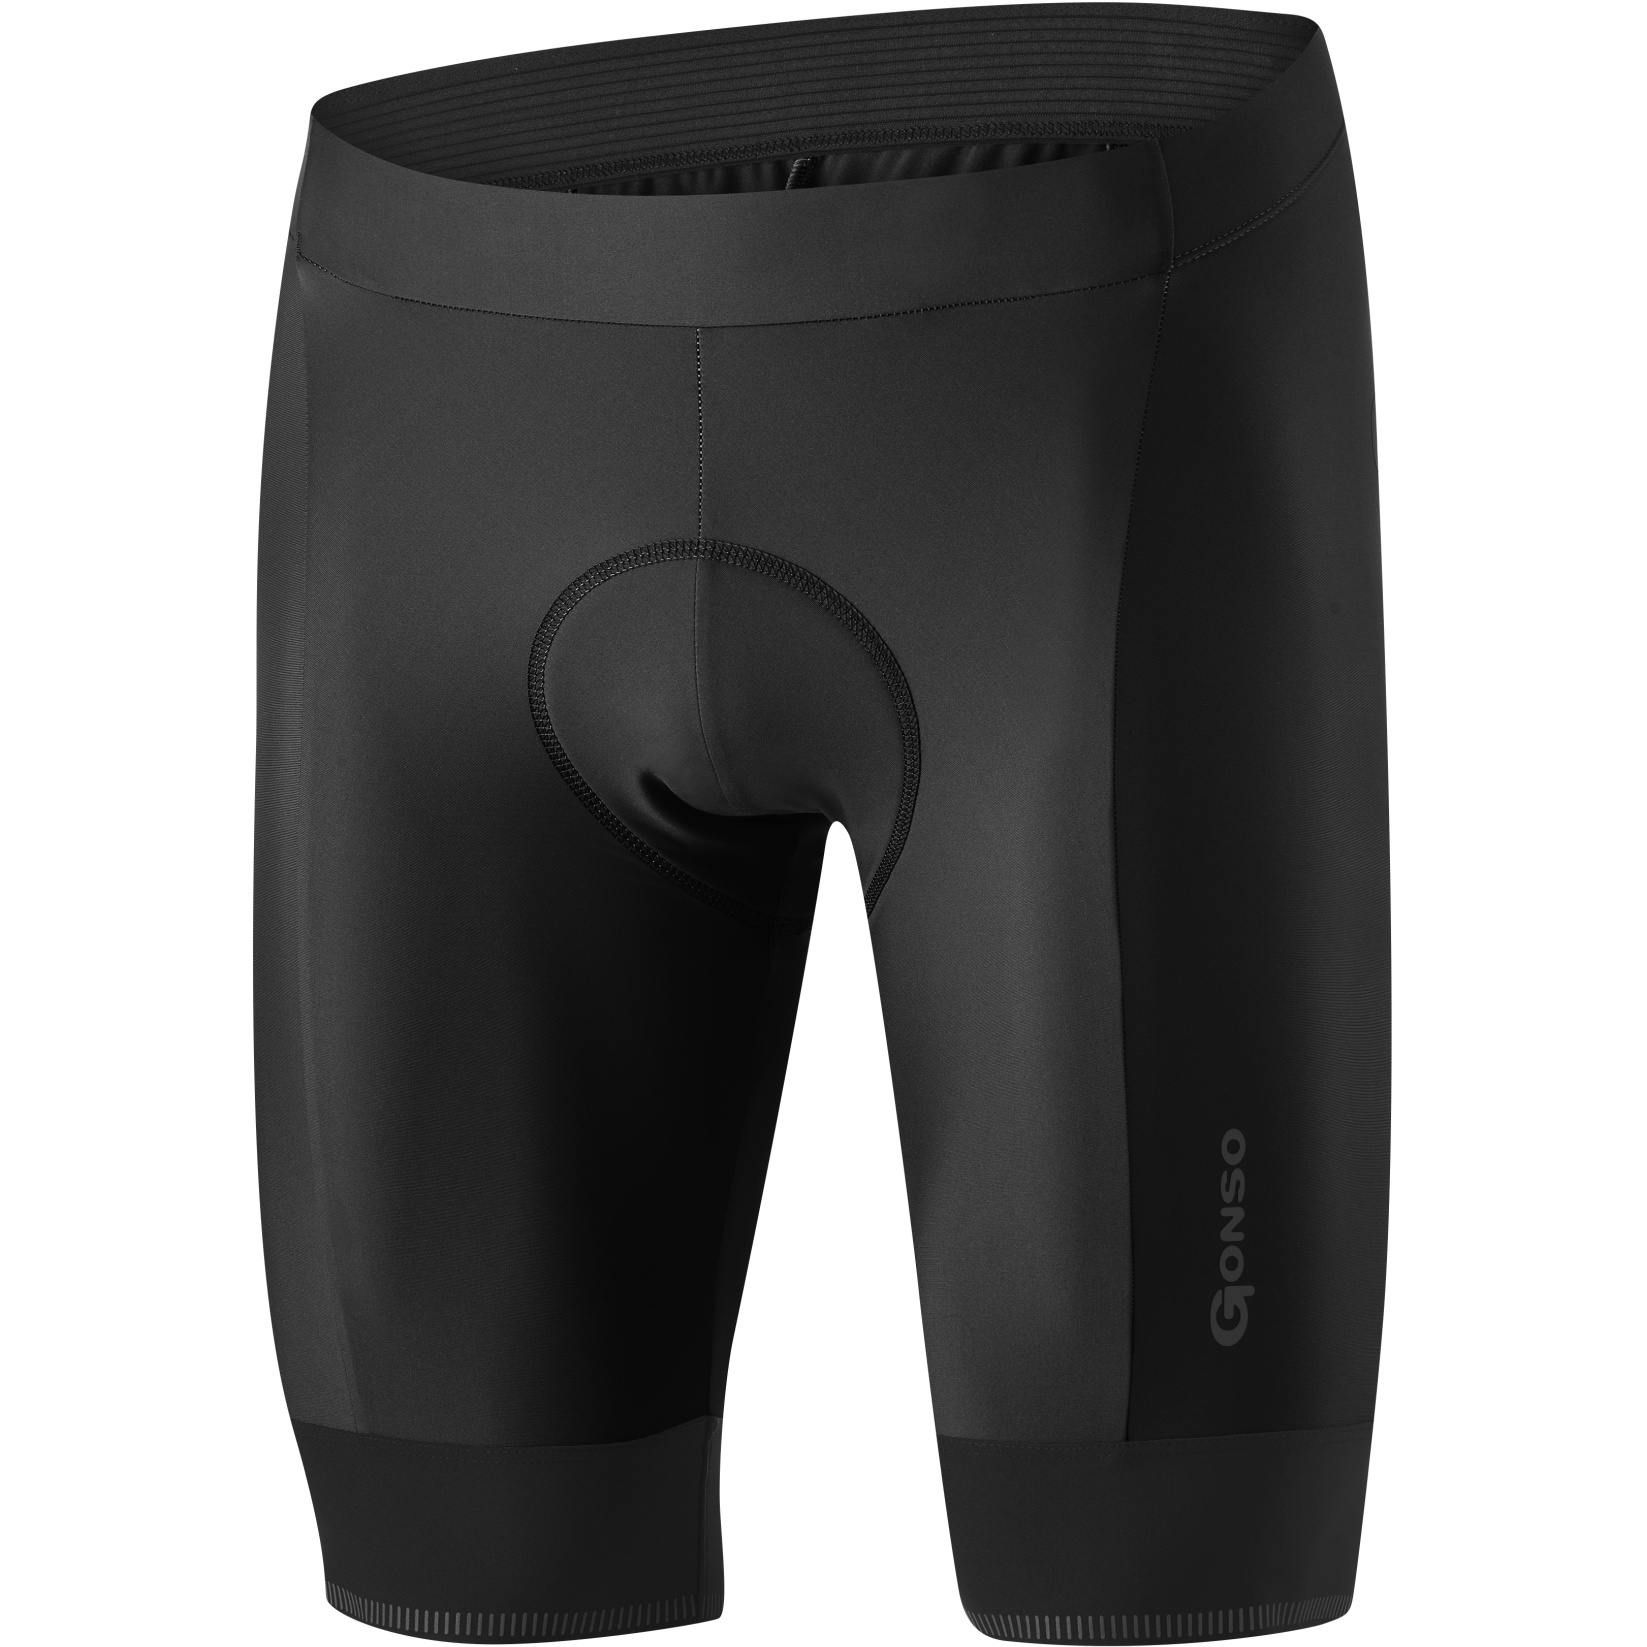 Picture of Gonso SITIVO Green Cycling Shorts Men - Black